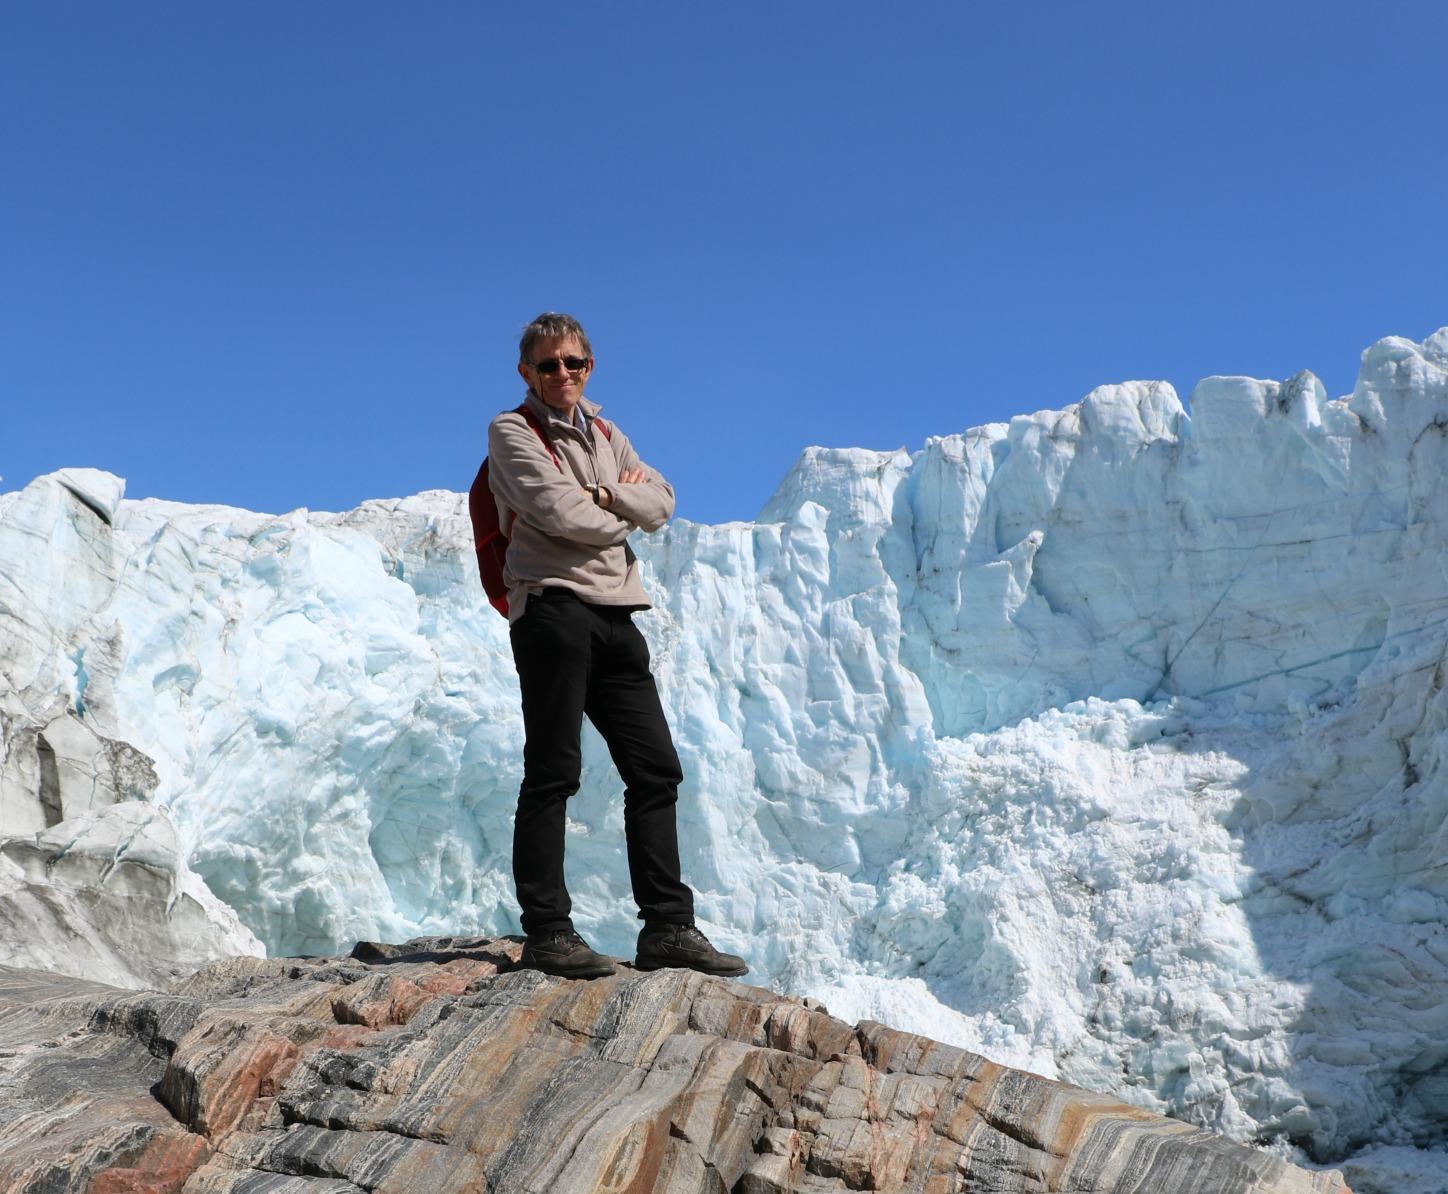 2016: Simon at the edge of Greenland’s ice sheet